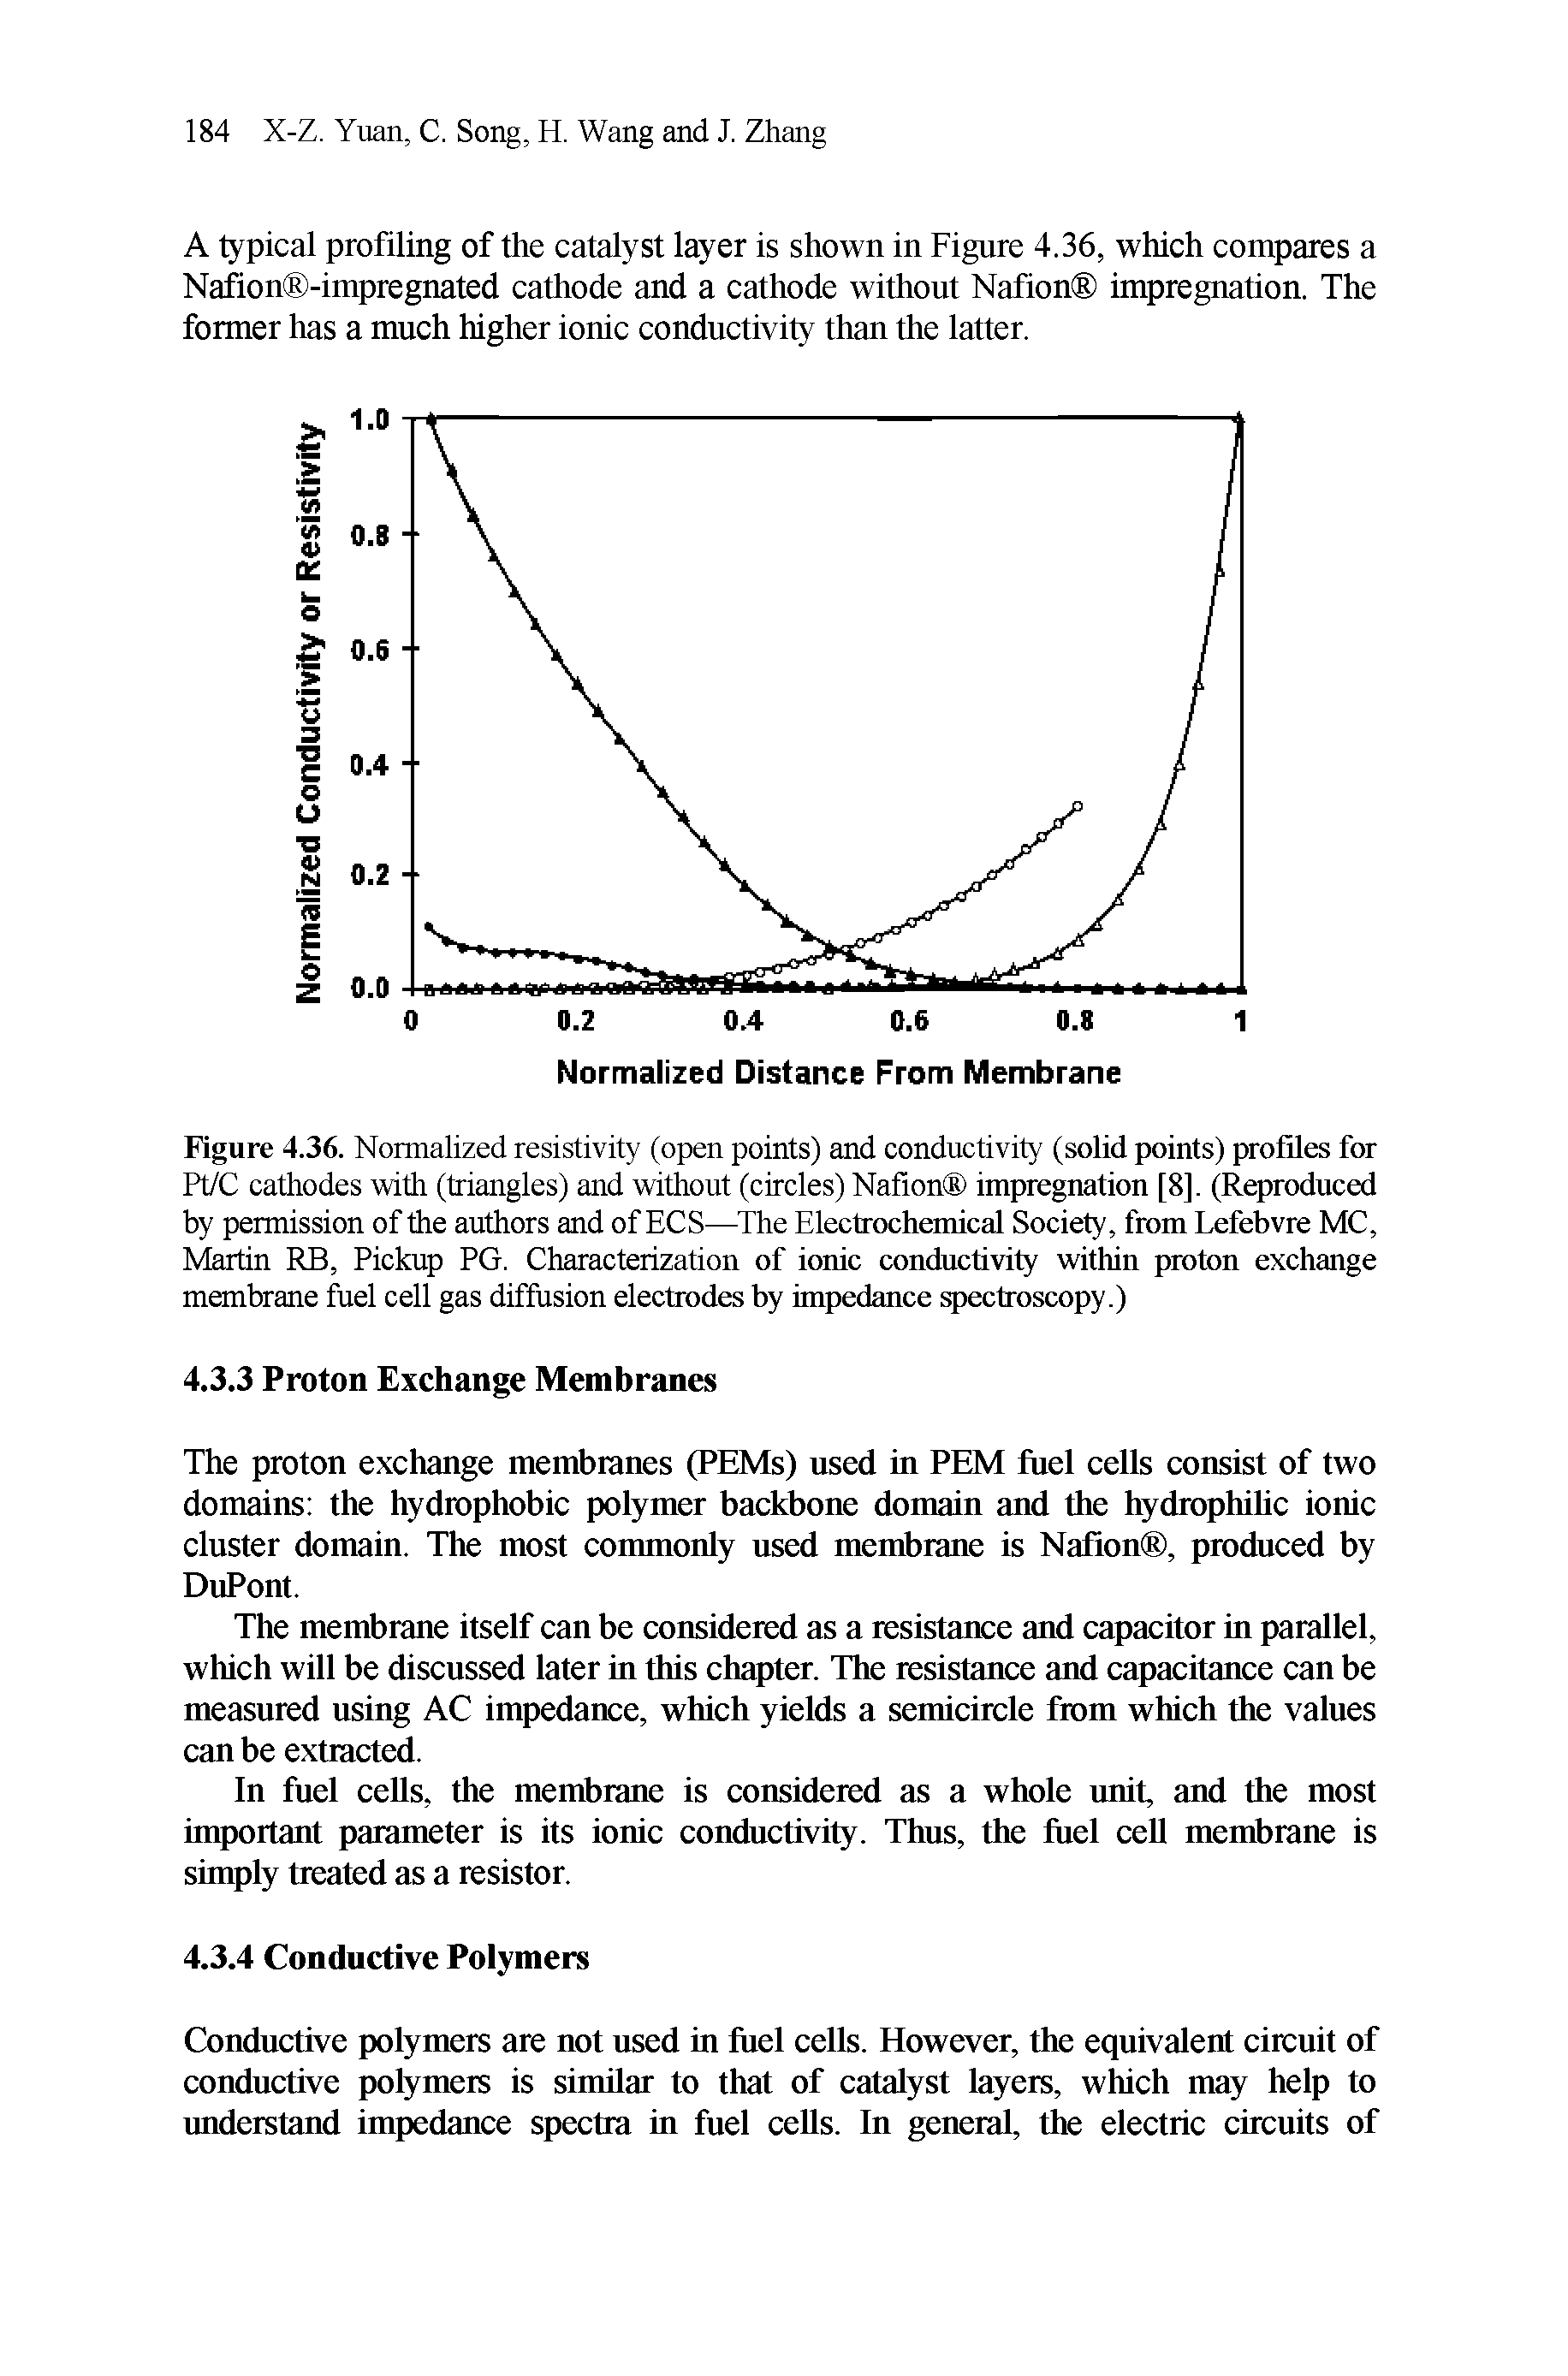 Figure 4.36. Normalized resistivity (open points) and conductivity (solid points) profiles for Pt/C cathodes with (triangles) and without (circles) Nafion impregnation [8], (Reproduced by permission of the authors and of ECS—The Electrochemical Society, from Lefebvre MC, Martin RES, Pickup PG. Characterization of ionic conductivity within proton exchange membrane fuel cell gas diffusion electrodes by impedance spectroscopy.)...